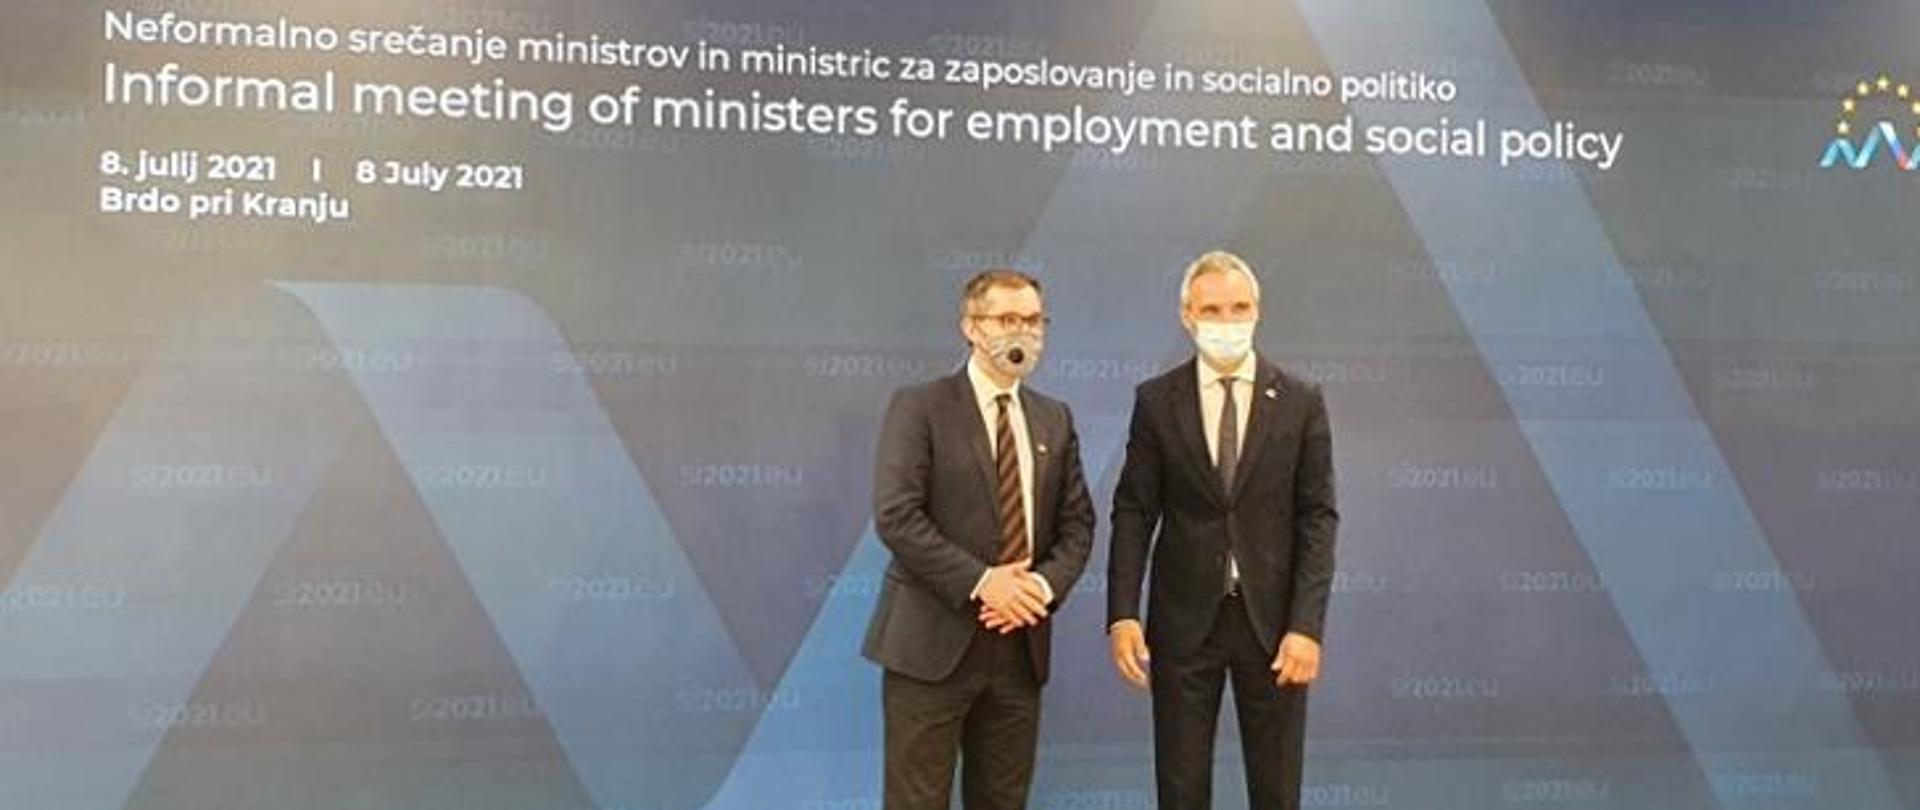 Deputy Minister of the Ministry of Labor and Social Policy, Marek Niedużak, standing in a mask against the background of a banner with an inscription "Informal meeting of ministers for employment and social policy"